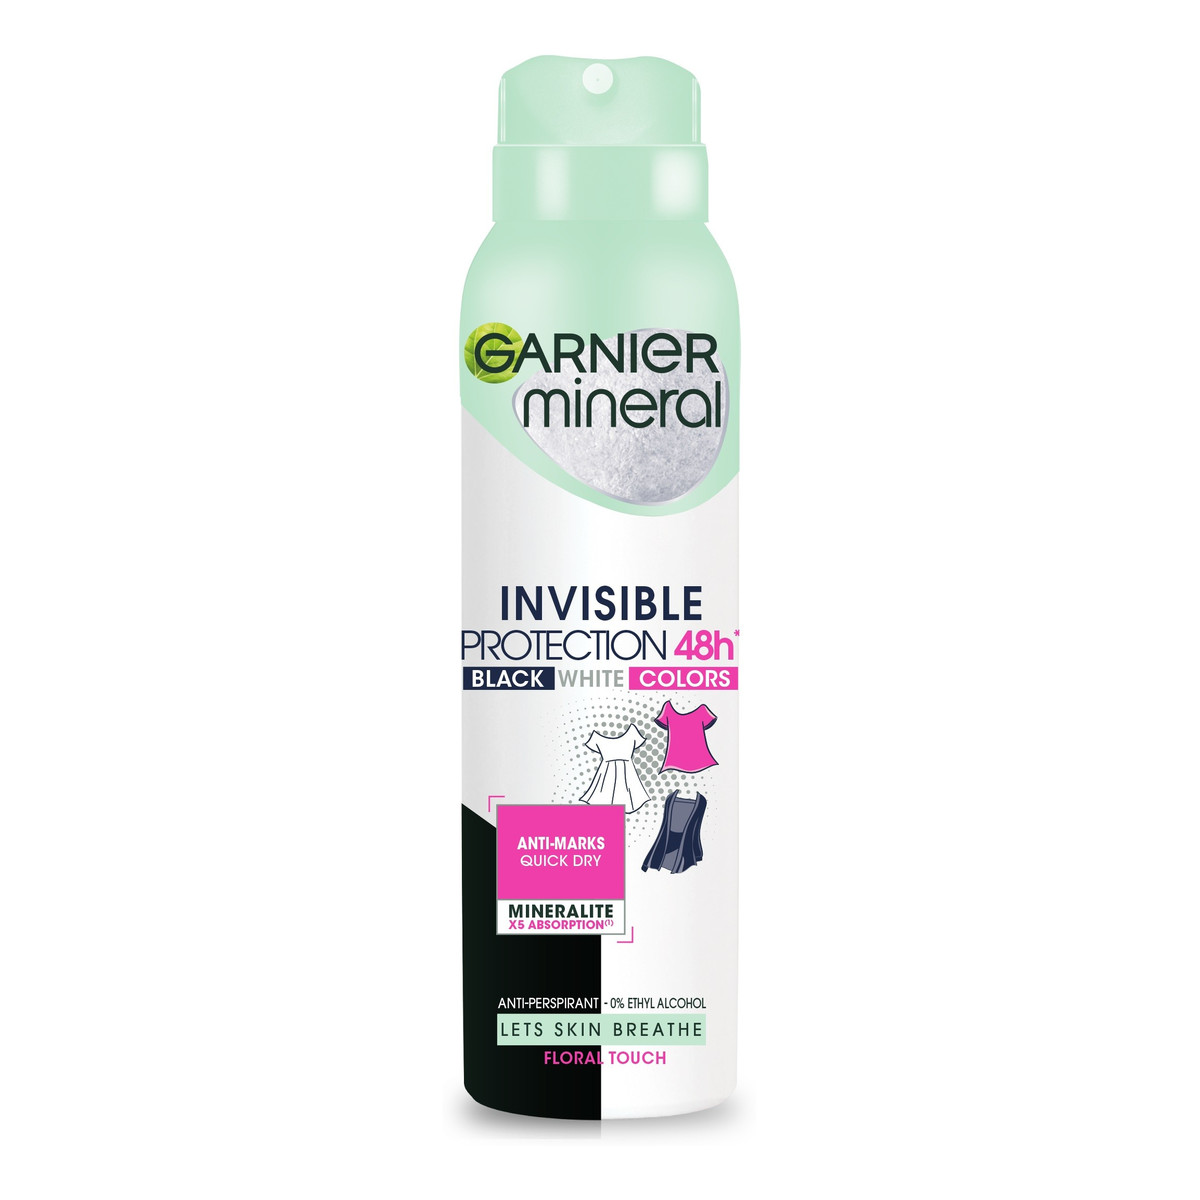 Garnier Mineral Dezodorant spray Invisible Protection 48h Floral Touch - Black White Colors 150ml